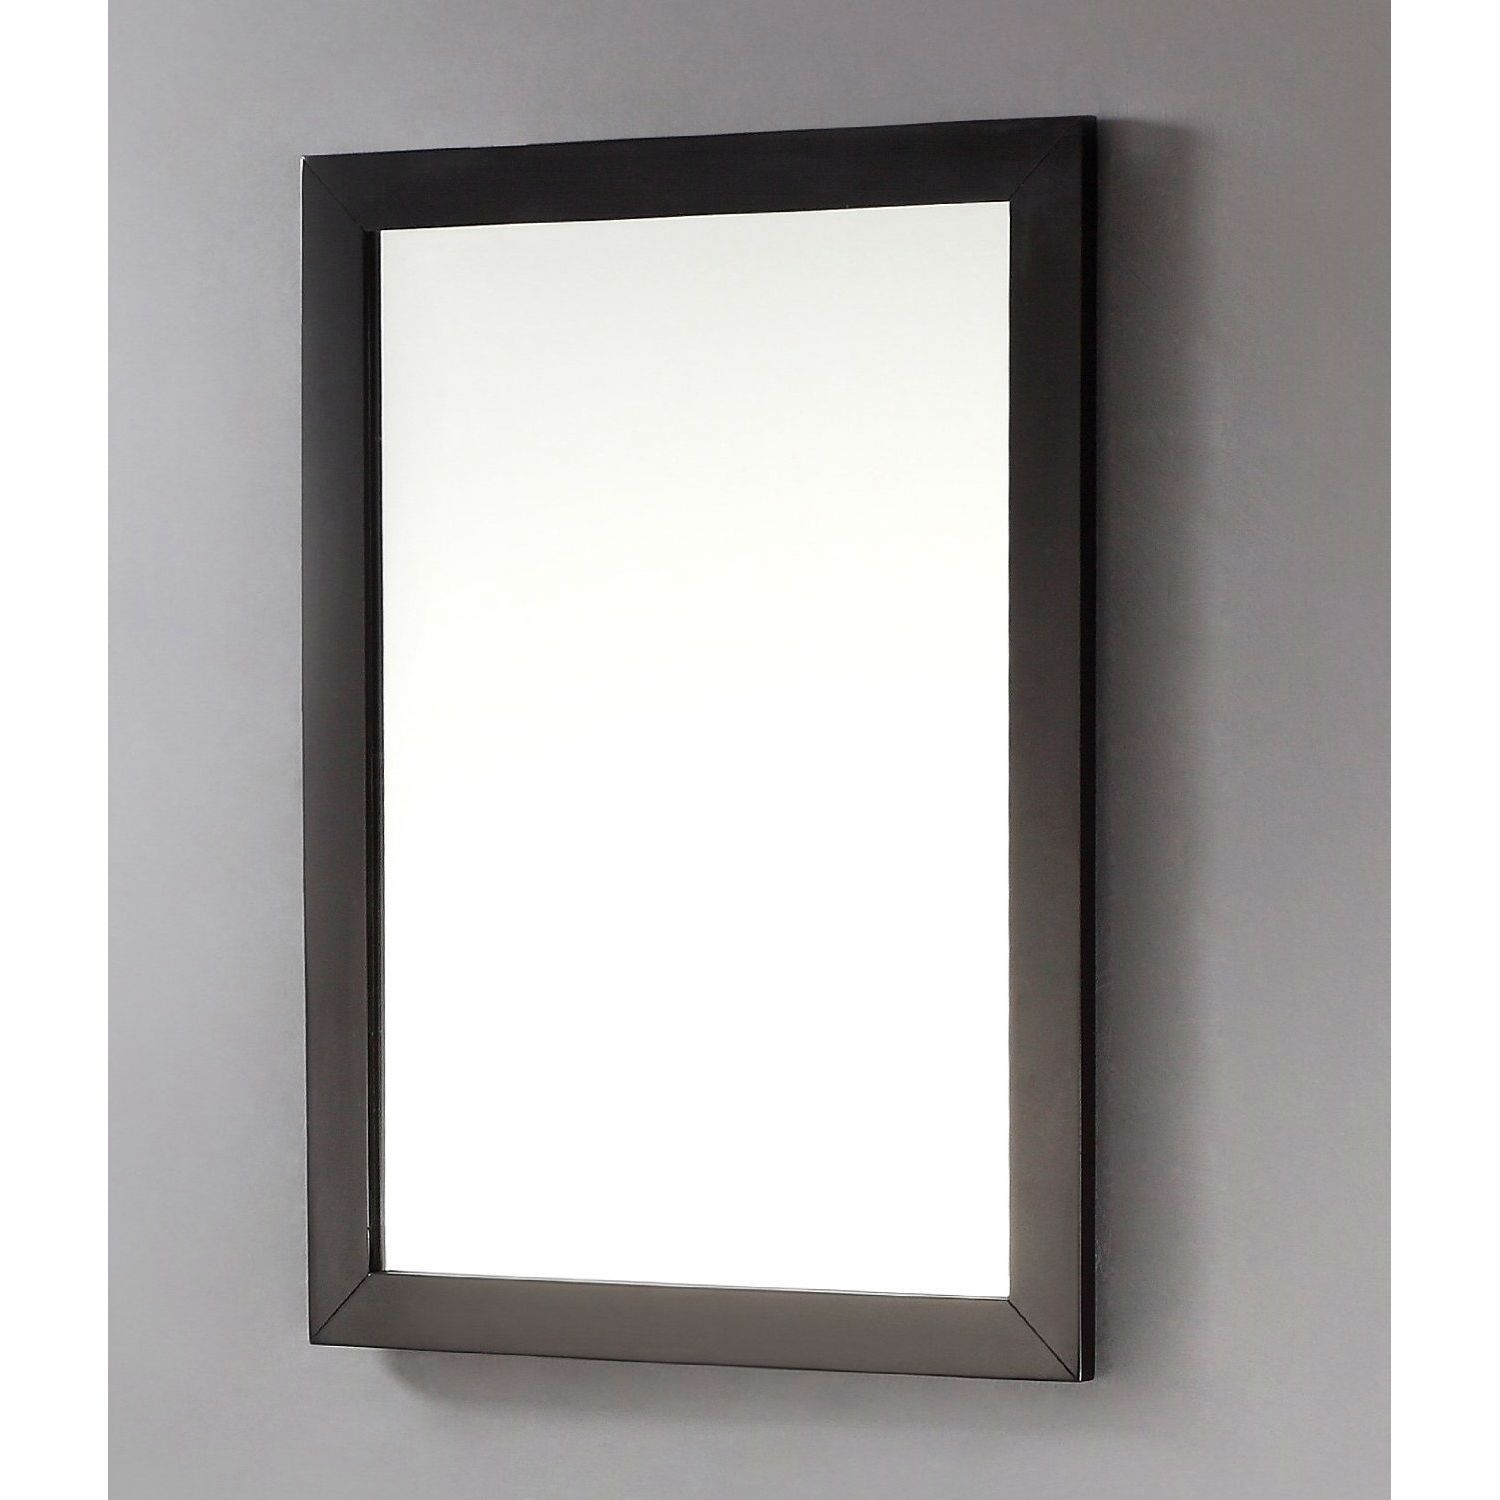 Modern 22 Inch X 30 Inch Bathroom Vanity Wall Mirror With Black Wood Frame Pertaining To Black Wood Wall Mirrors (View 12 of 15)